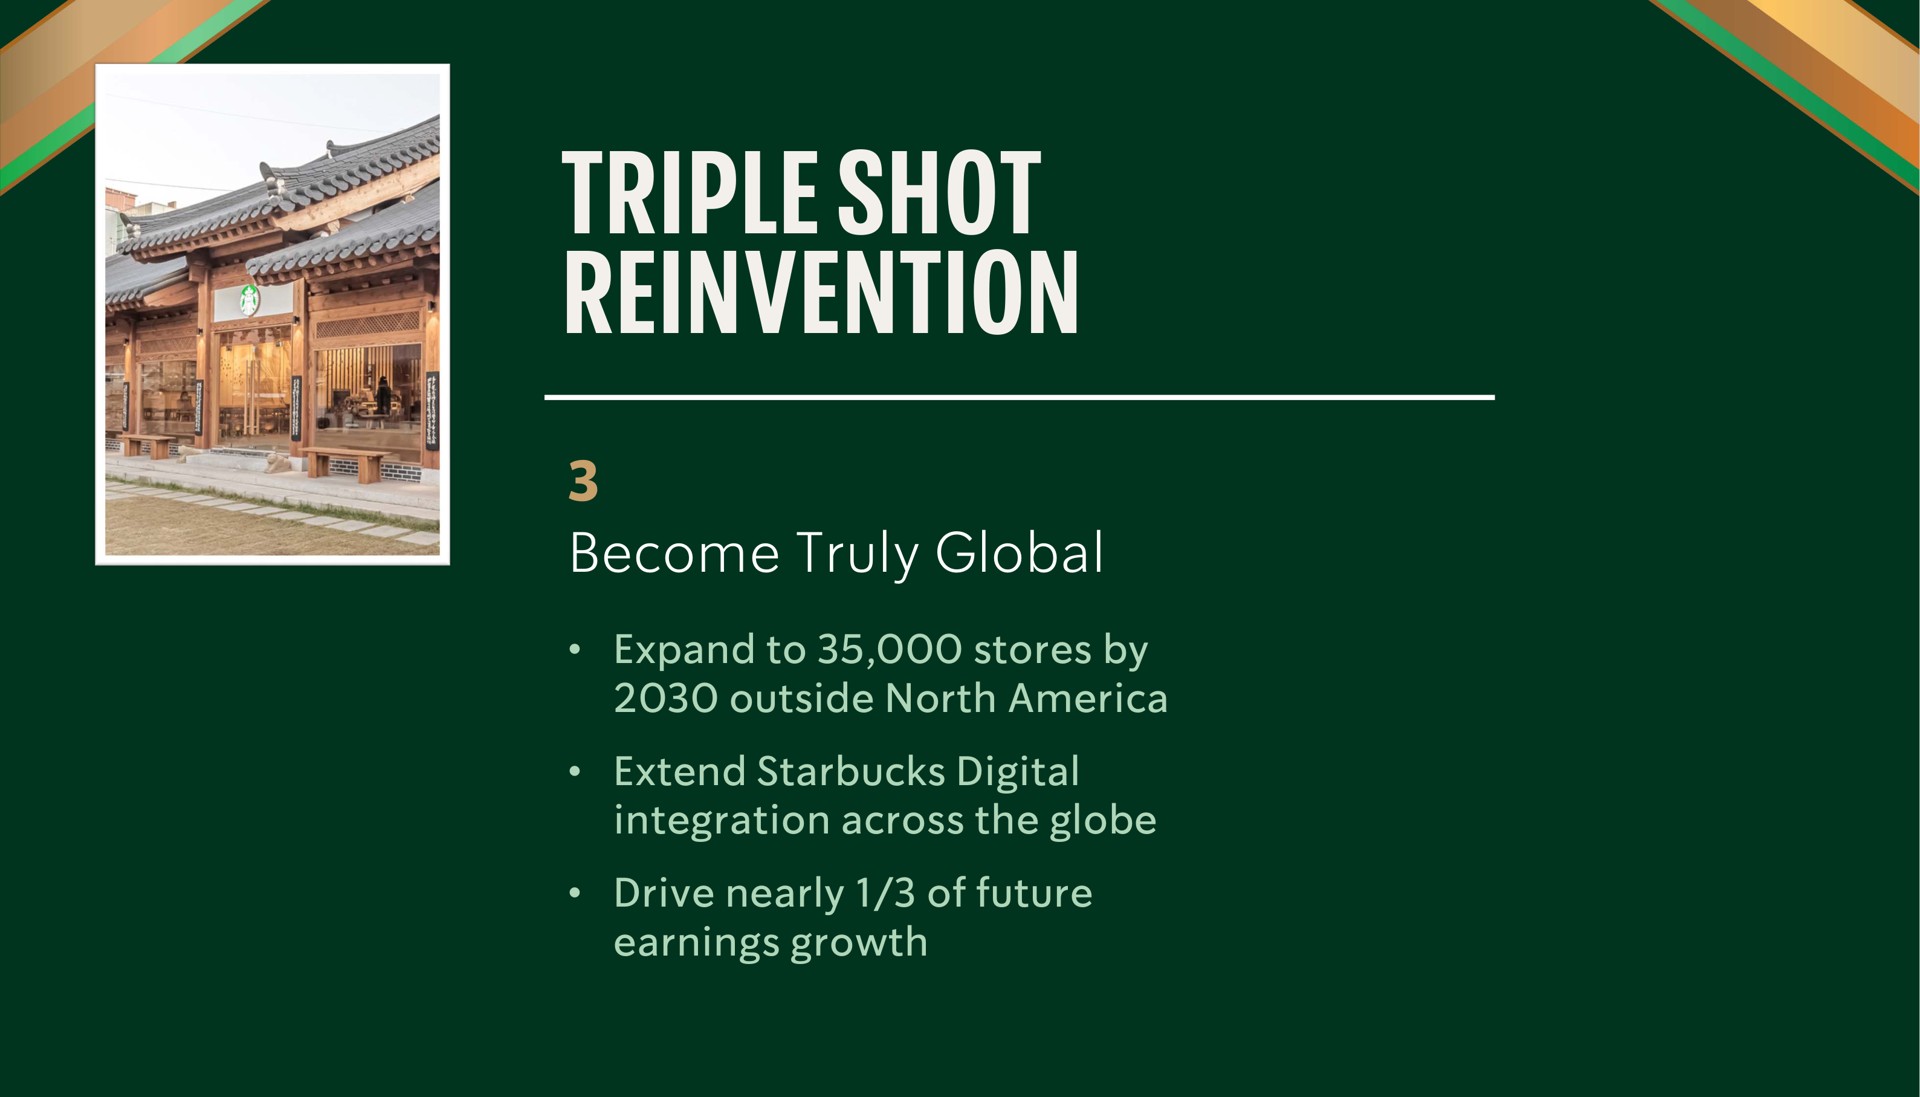 triple shot reinvention become truly global | Starbucks